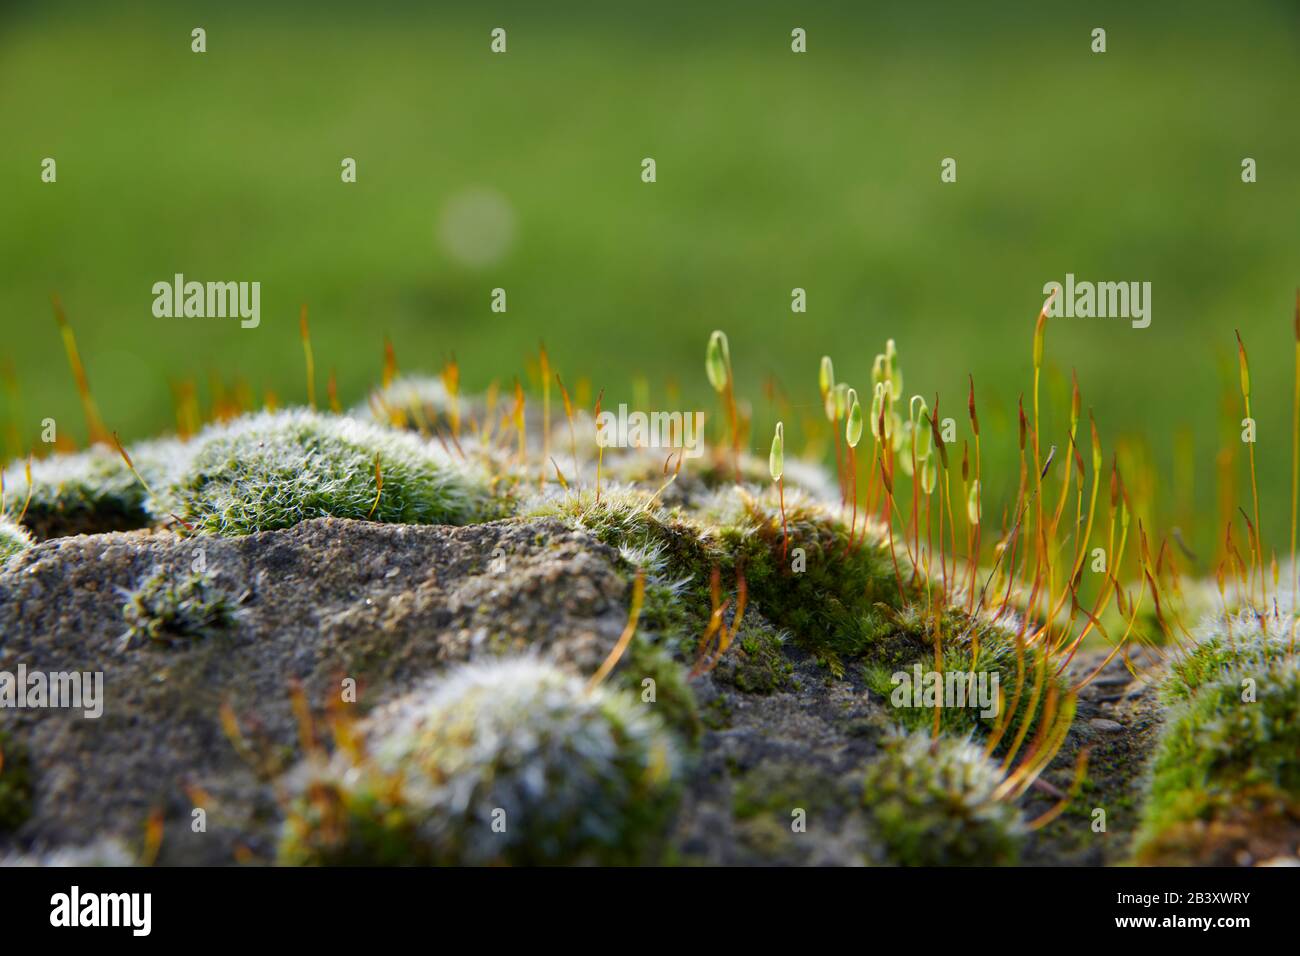 149 Pincushion Moss Images, Stock Photos, 3D objects, & Vectors